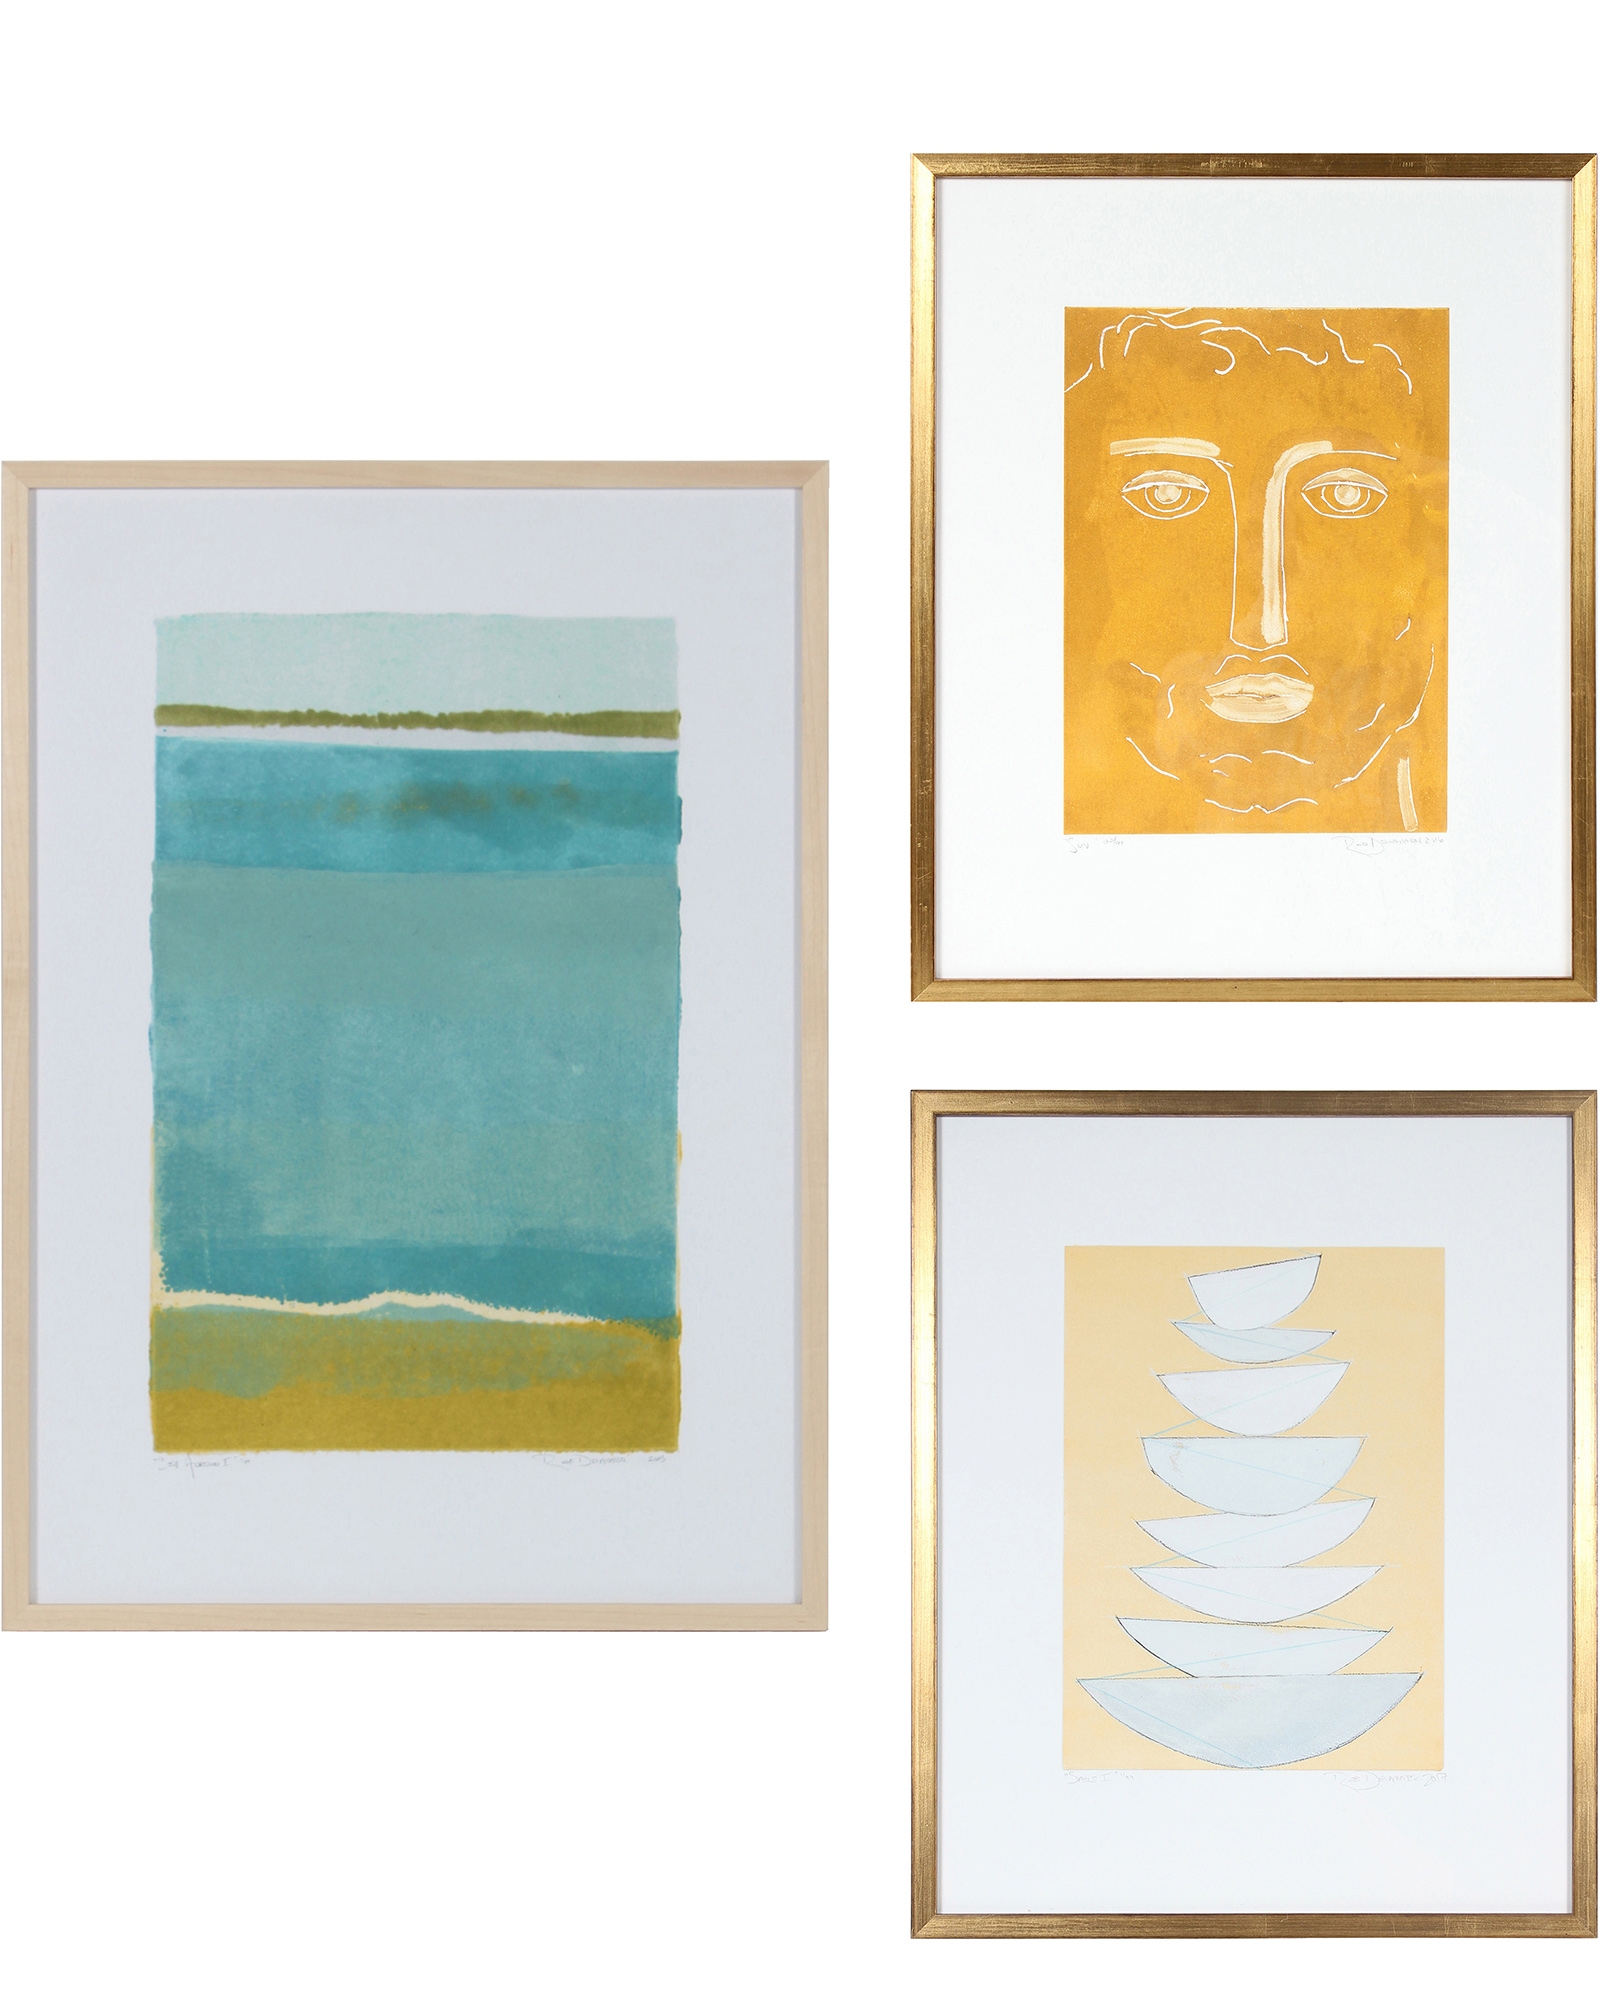 "Gallery Wall, Set of 3" by Rob Delamater - Image 0